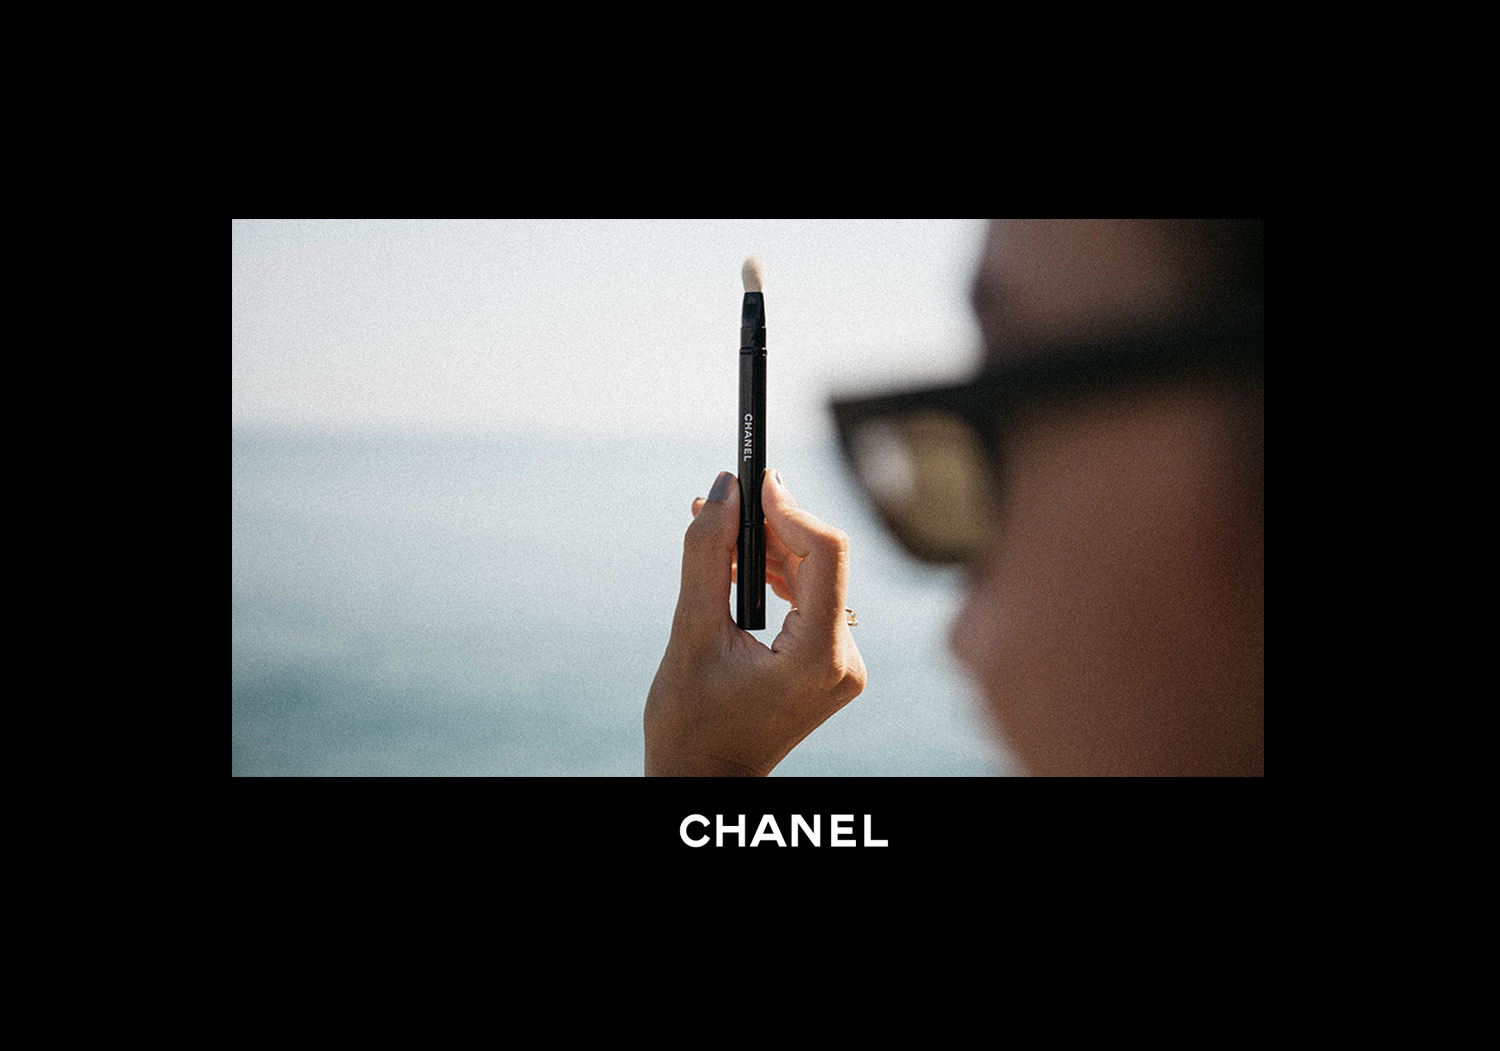 chanel-beauty-make-up-dept43-favorite-products-dept43-beatrice-gutu-visual-story-6